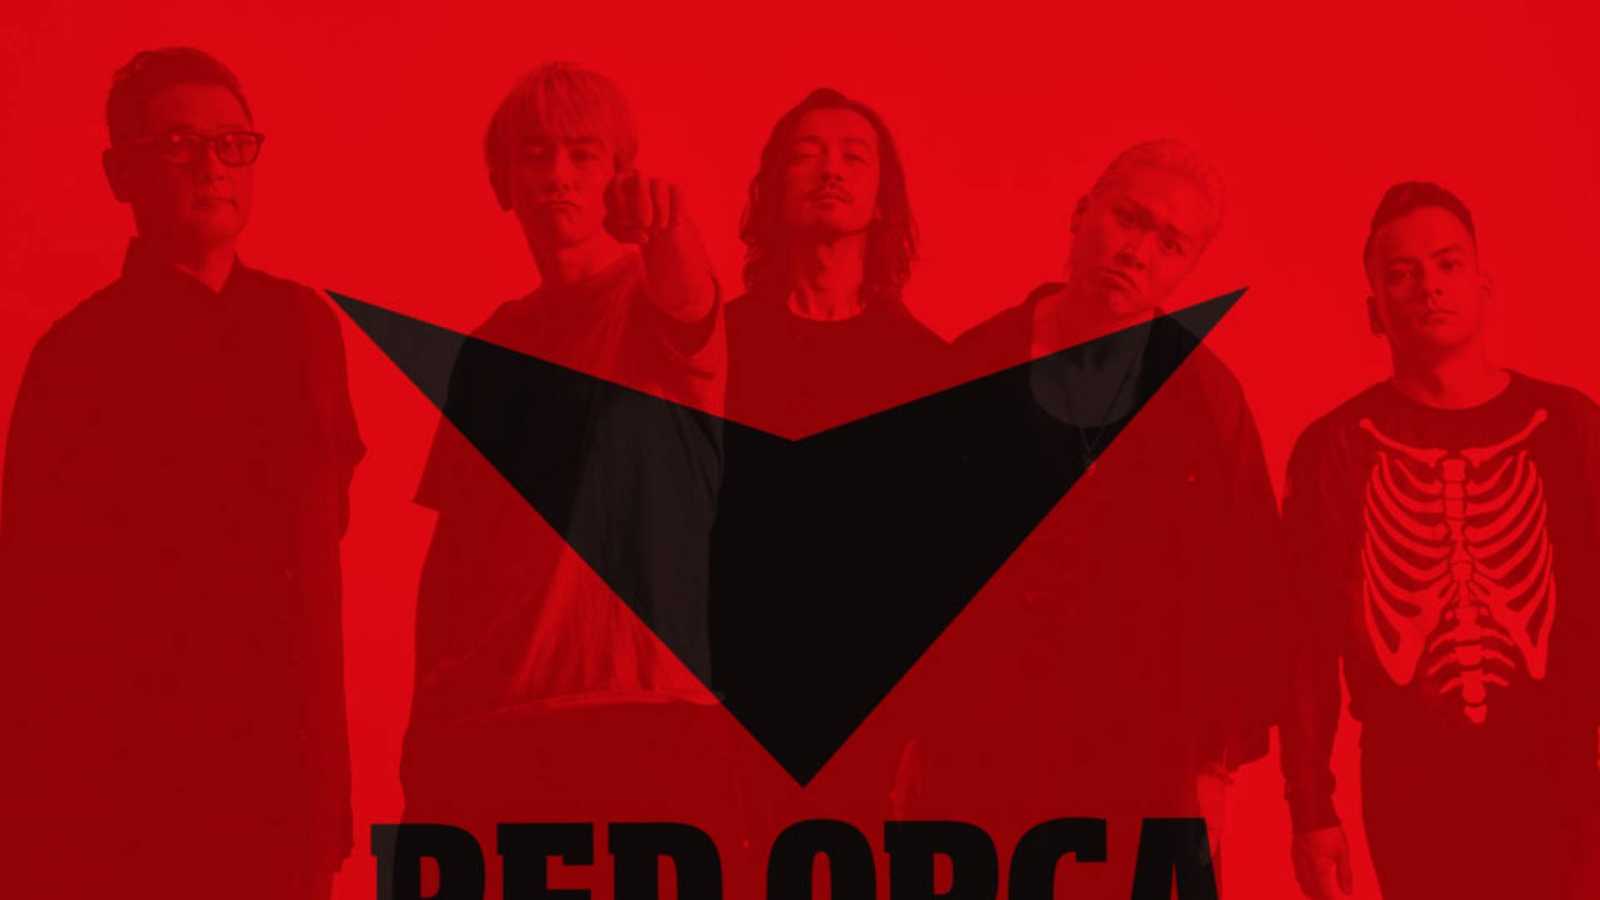 RED ORCA © RED ORCA. All rights reserved.